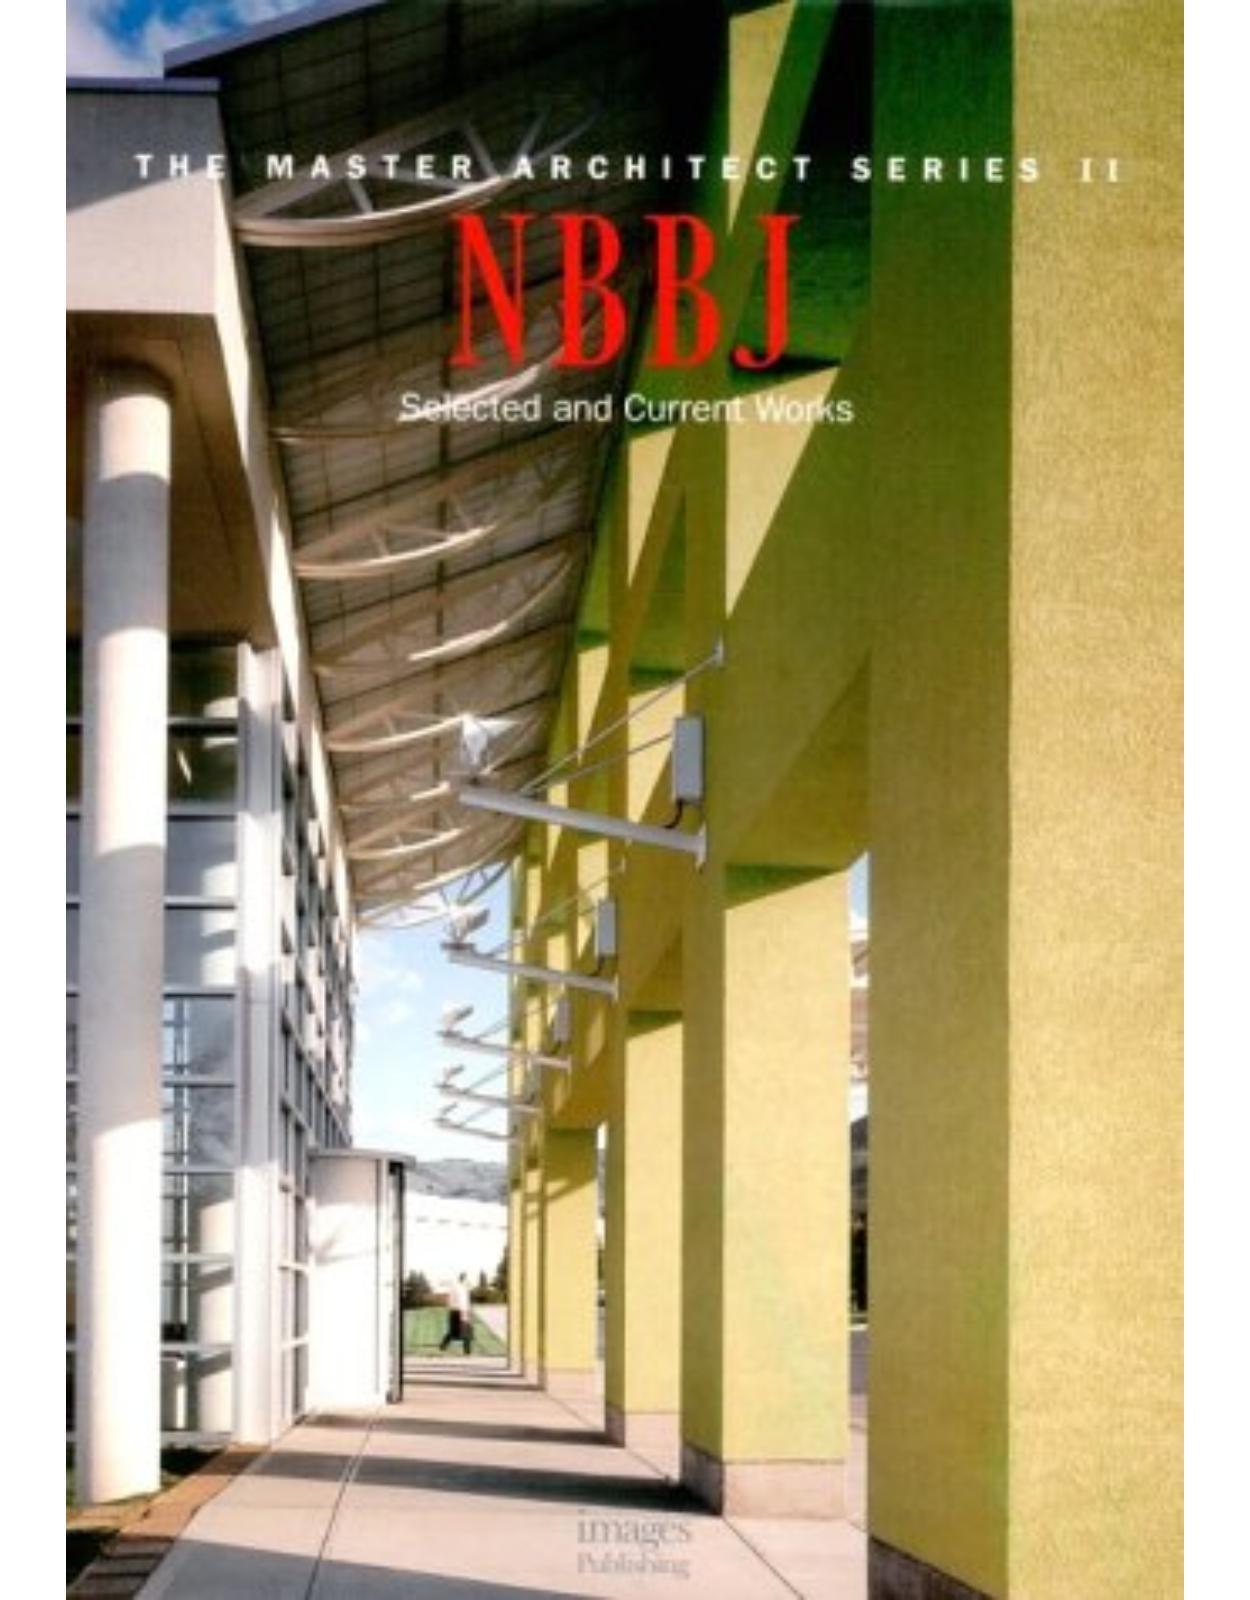 NBBJ: Selected and Current Works (Master Architect Series II)